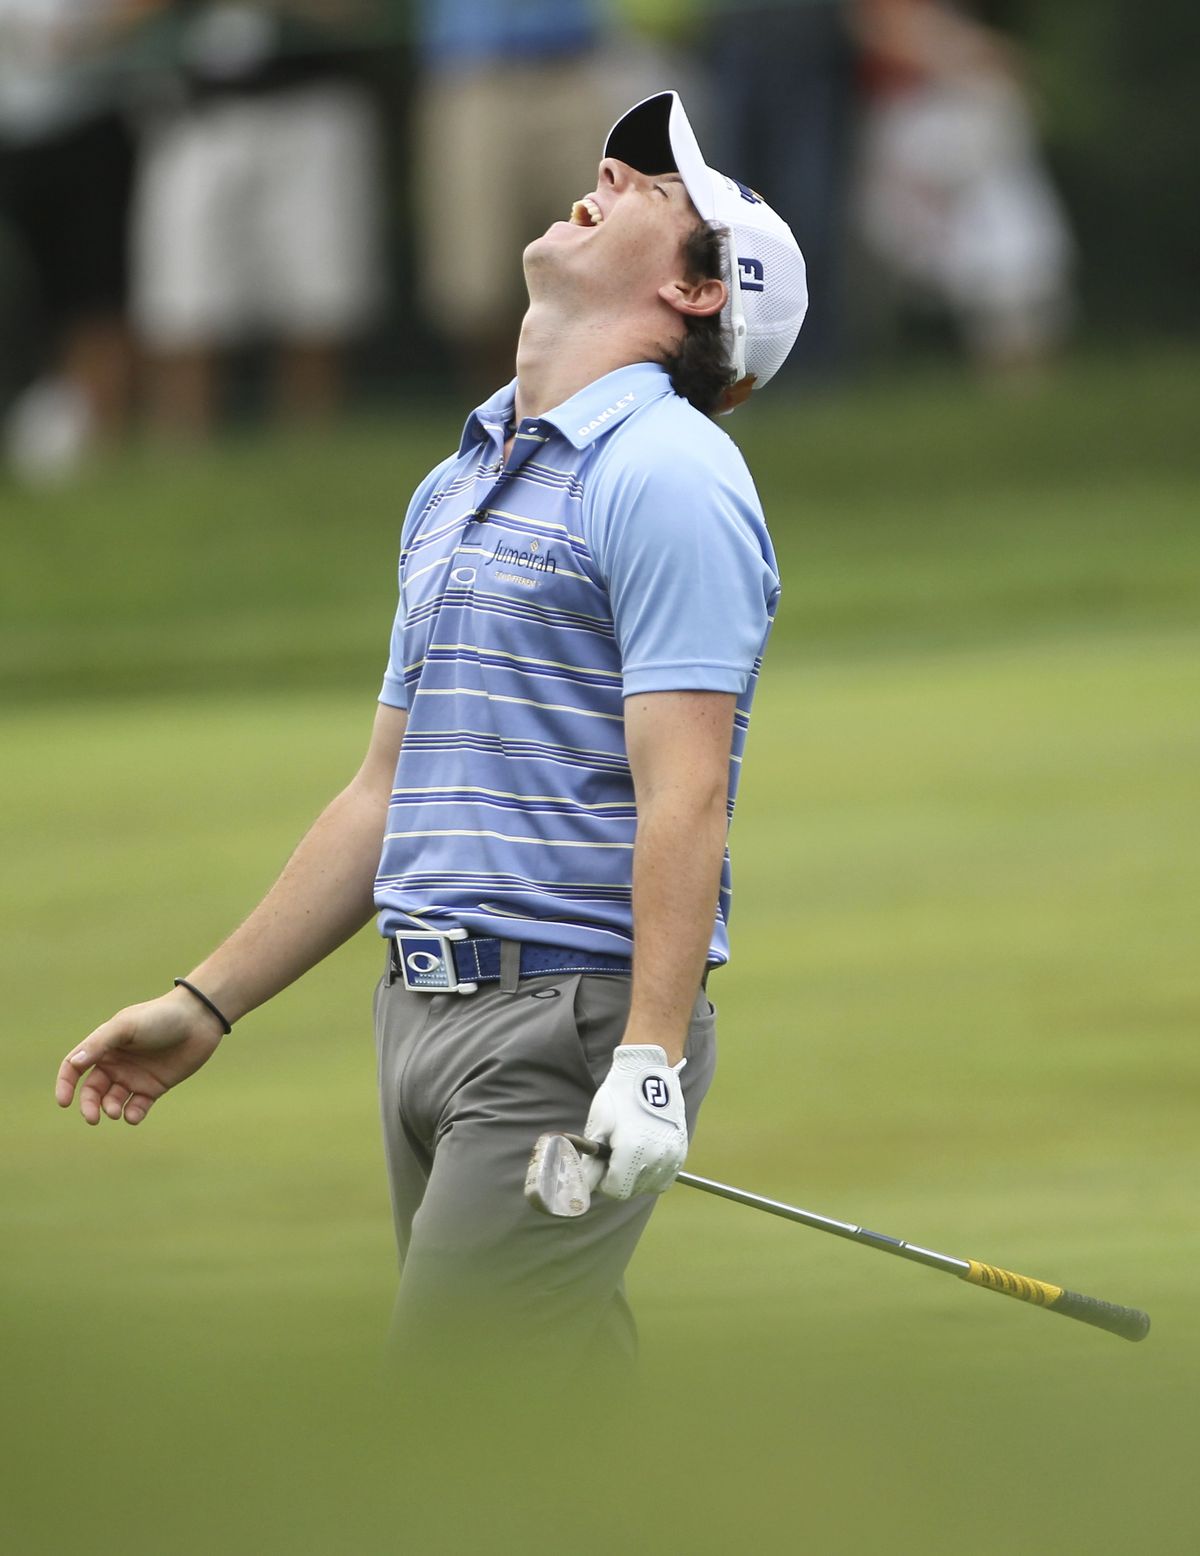 Rory McIlroy reacts to his eagle on the eighth hole, a wedge shot from 114 yards out, during the second round of the U.S. Open. (Associated Press)